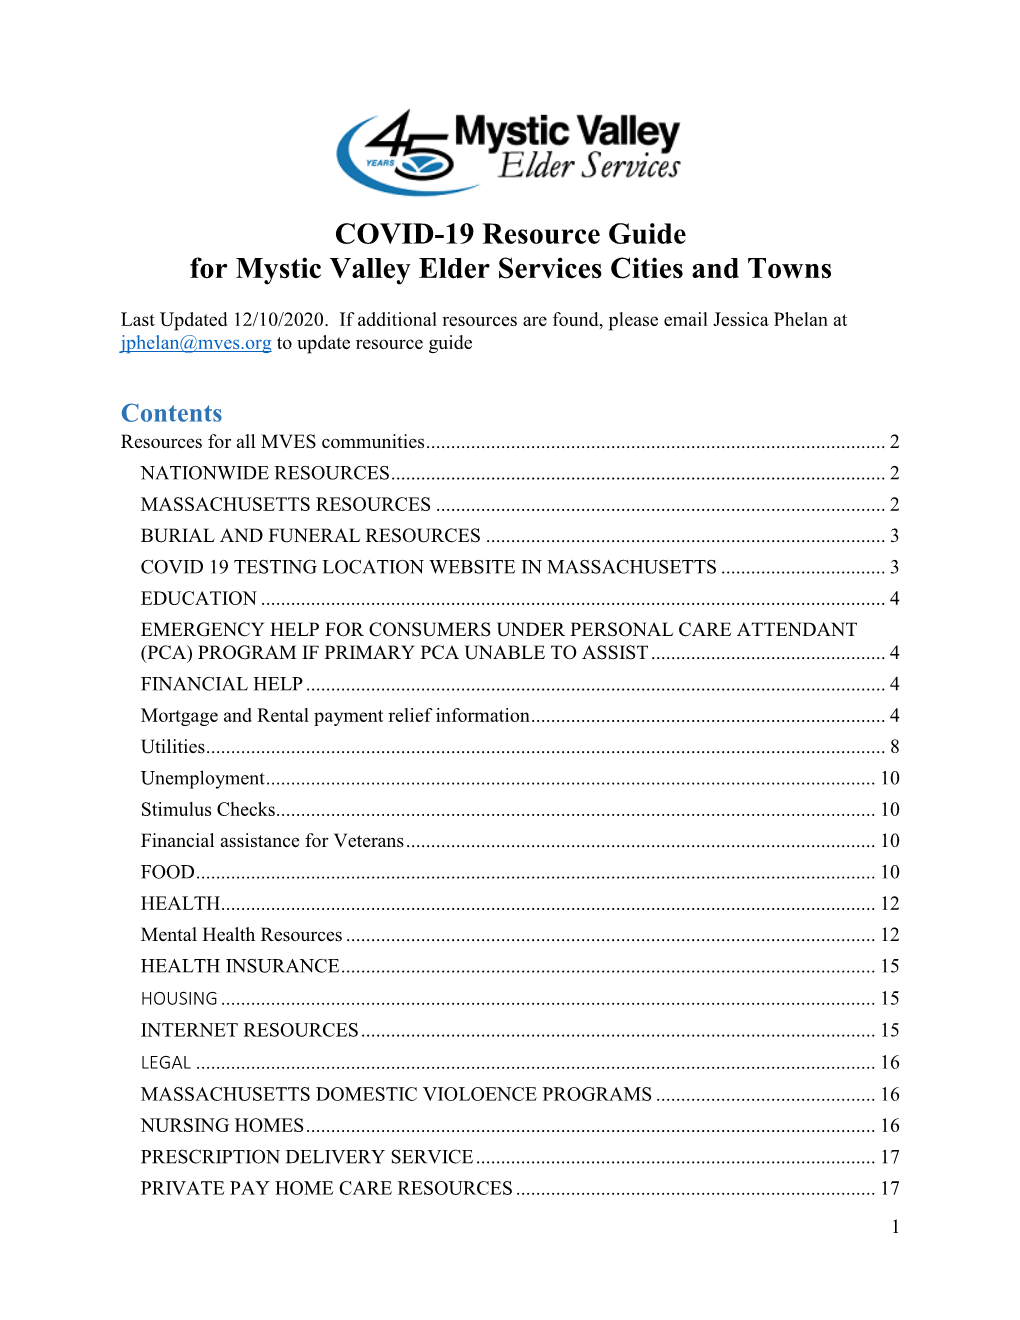 COVID-19 Resource Guide for Mystic Valley Elder Services Cities and Towns